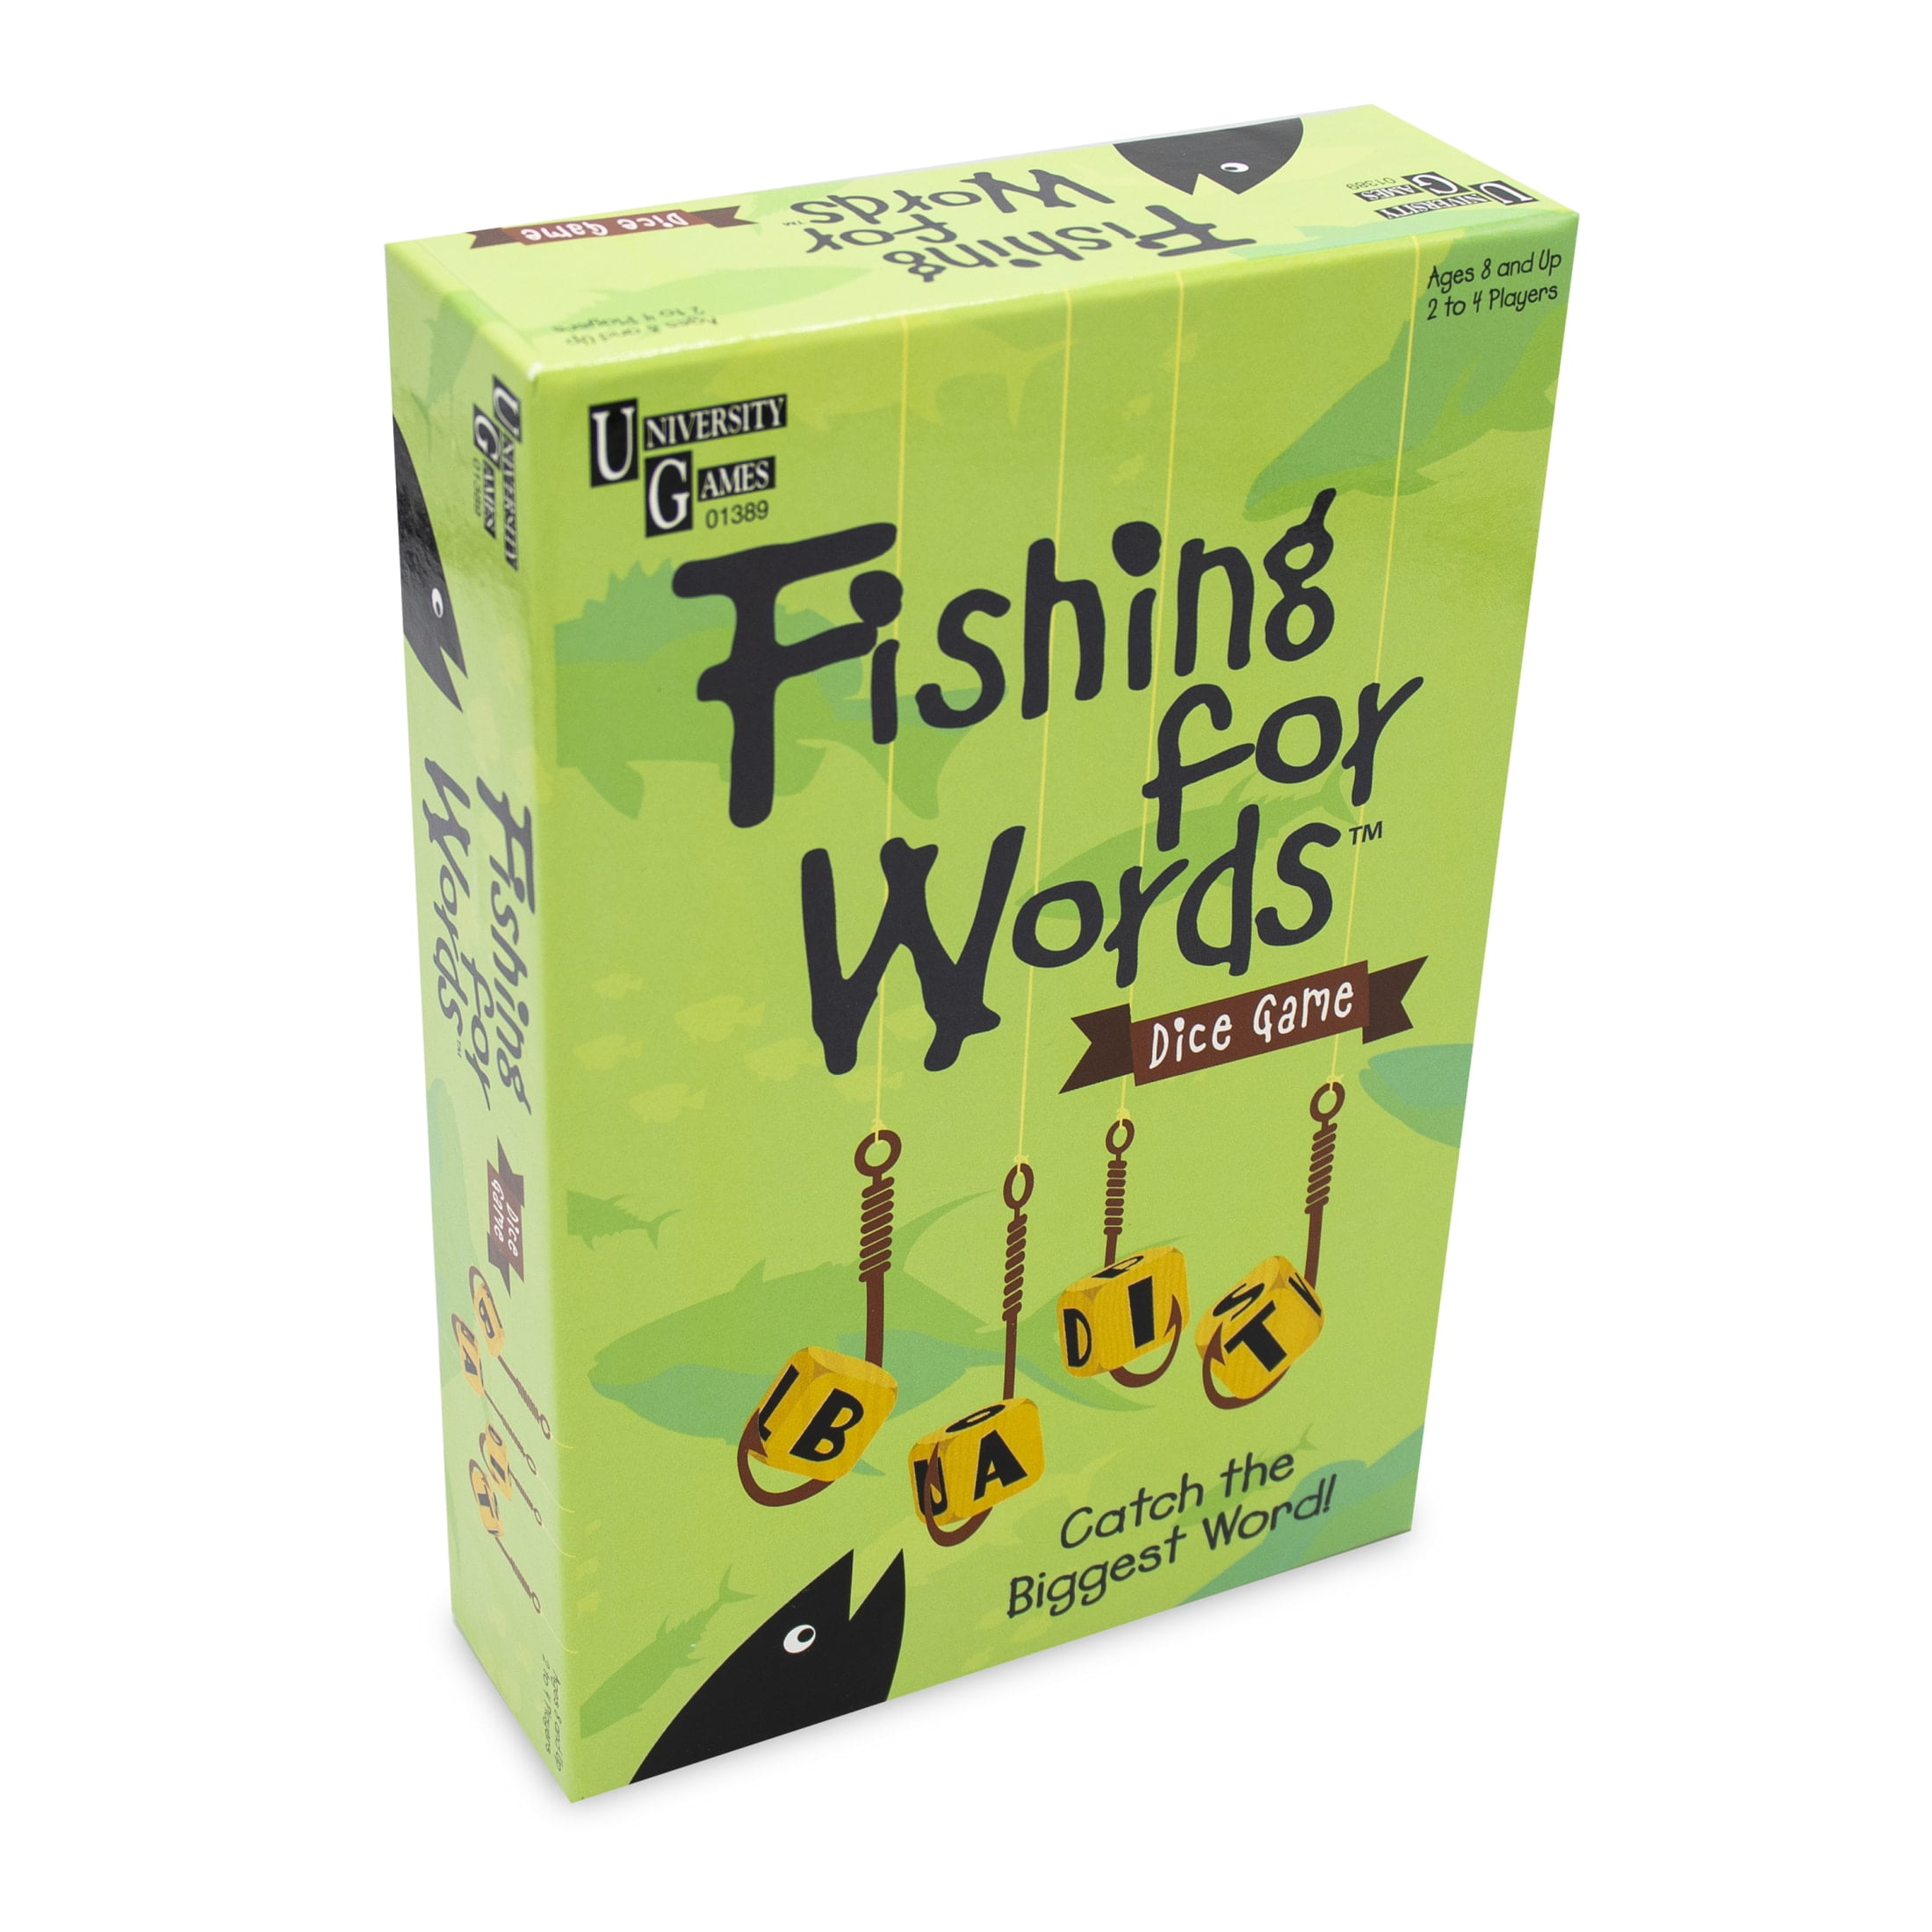 University Games | Fishing for Words, 2 to 4 players, ages 8 and up